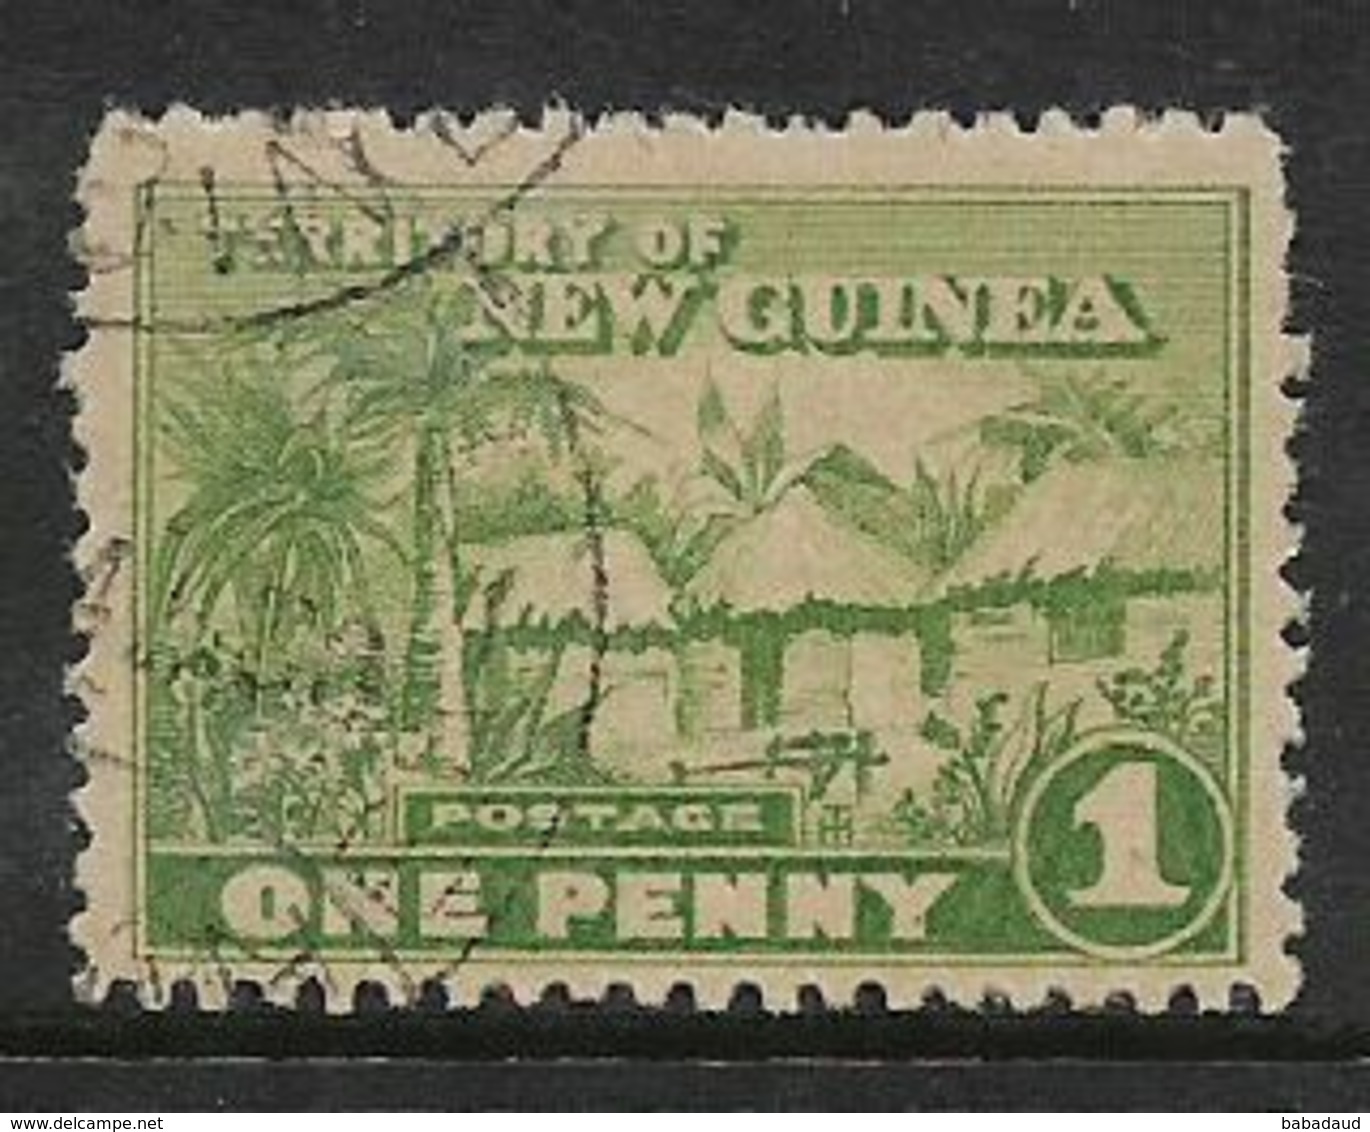 New Guinea, GVR, 1925, 1d Green, Used, - Papua New Guinea